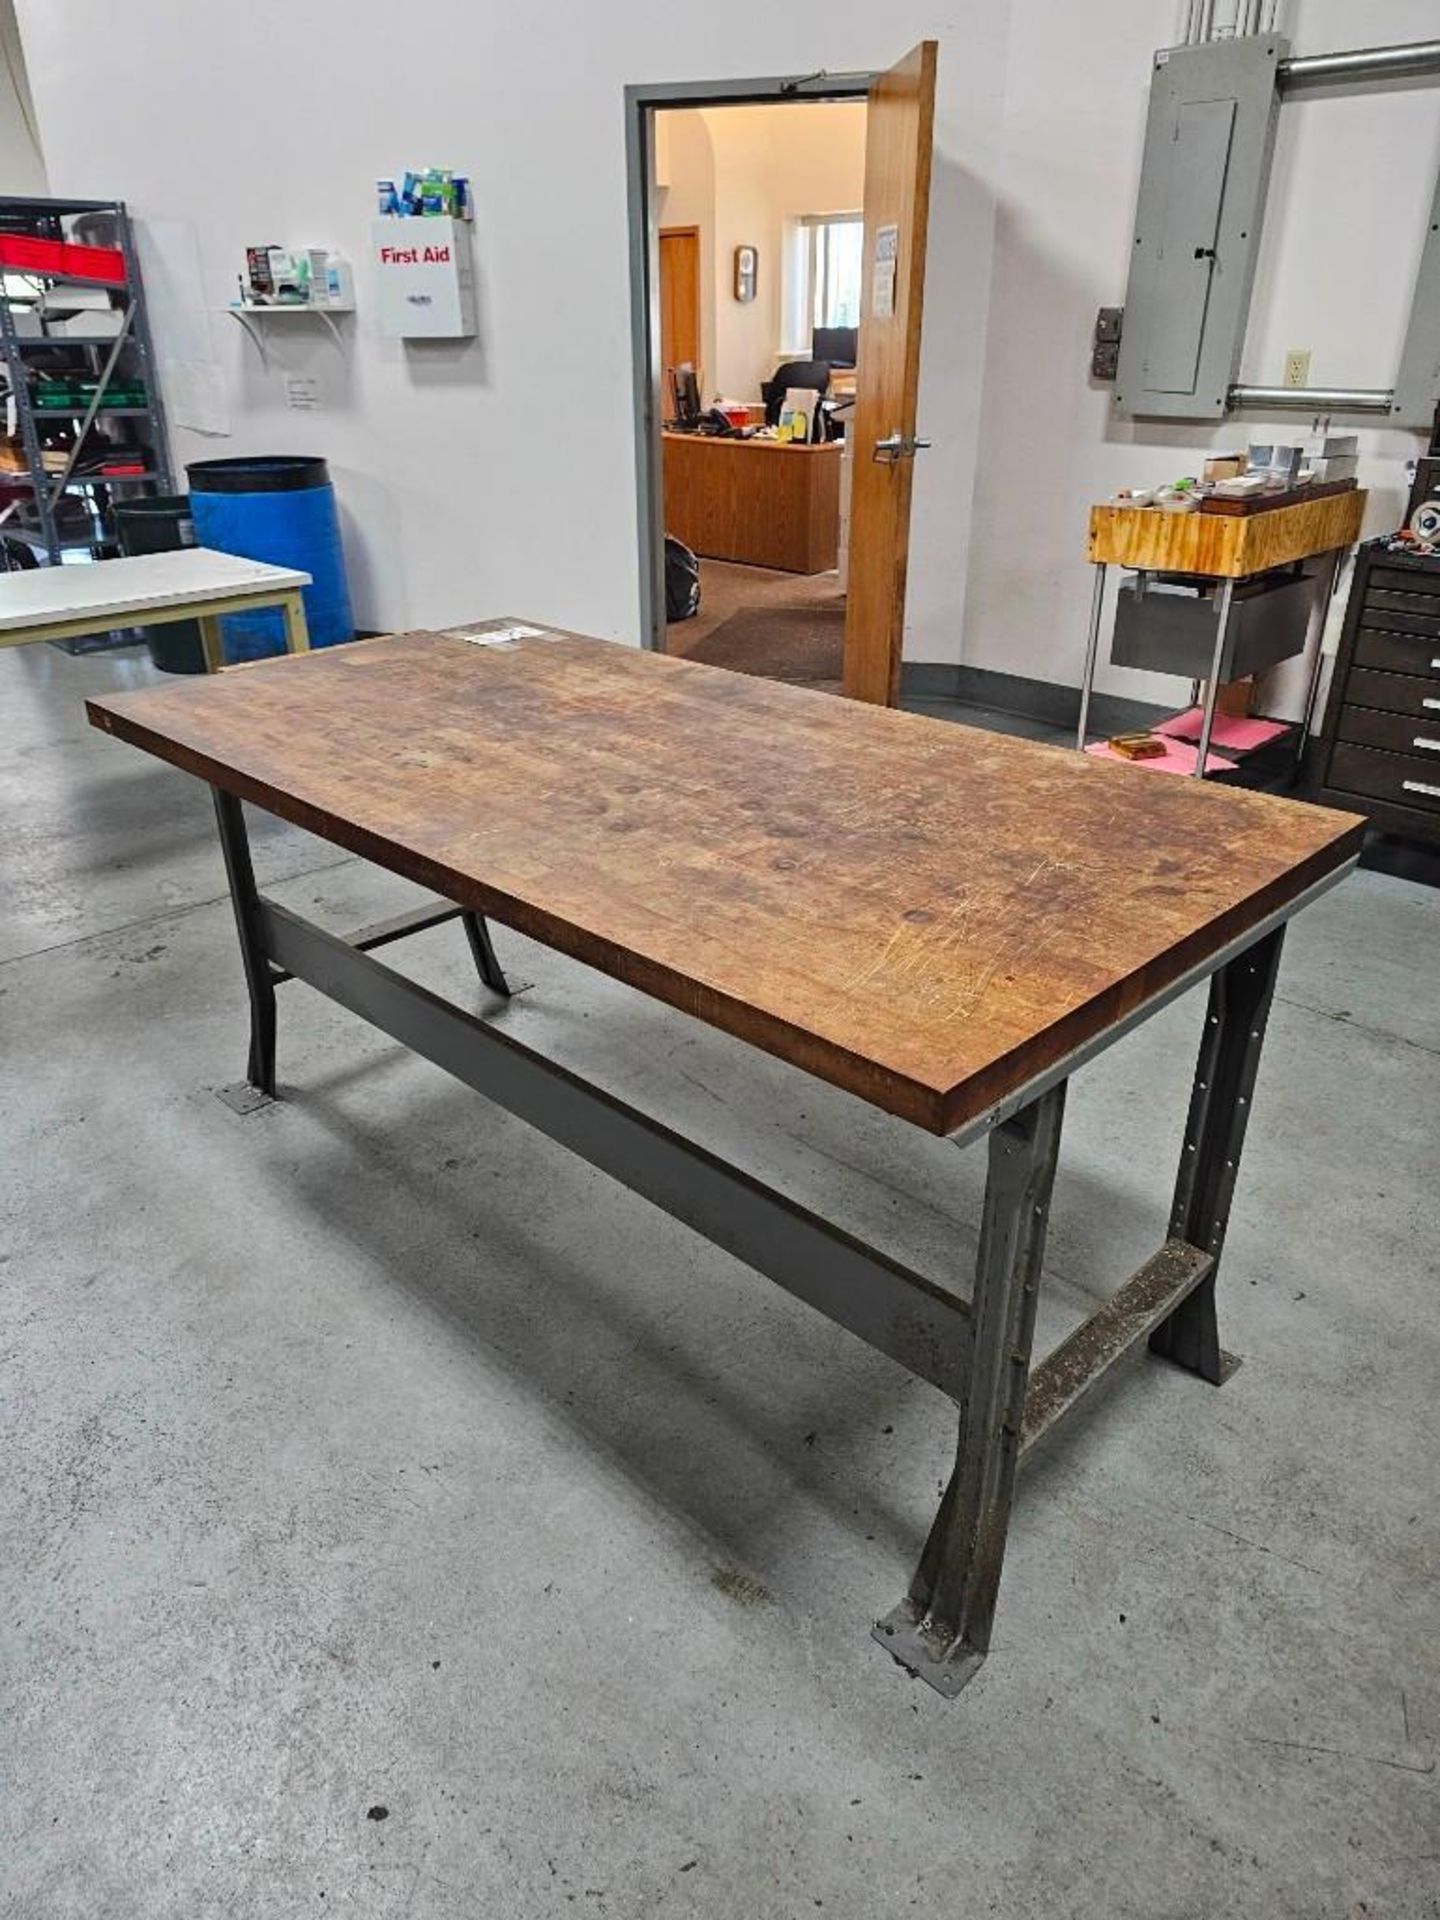 WOOD TABLE WORKBENCH WITH METAL LEGS - Image 3 of 4